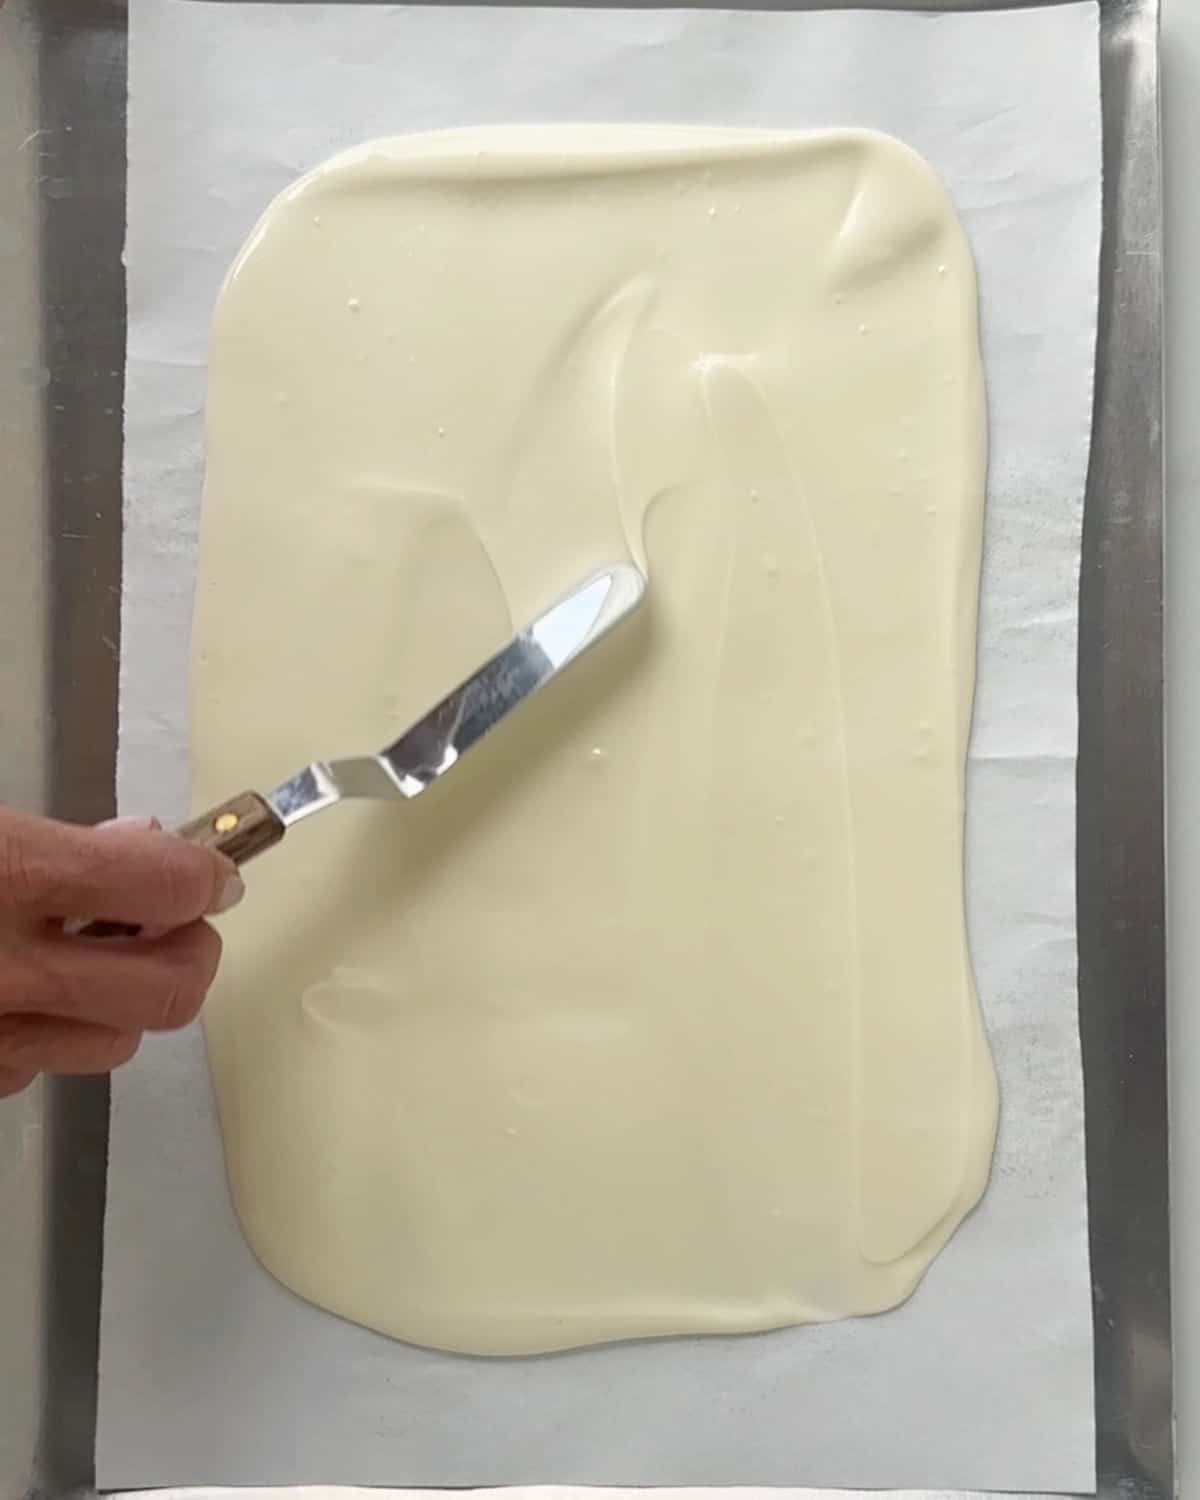 Spreading melted white chocolate with an offset spatula on white parchment paper.